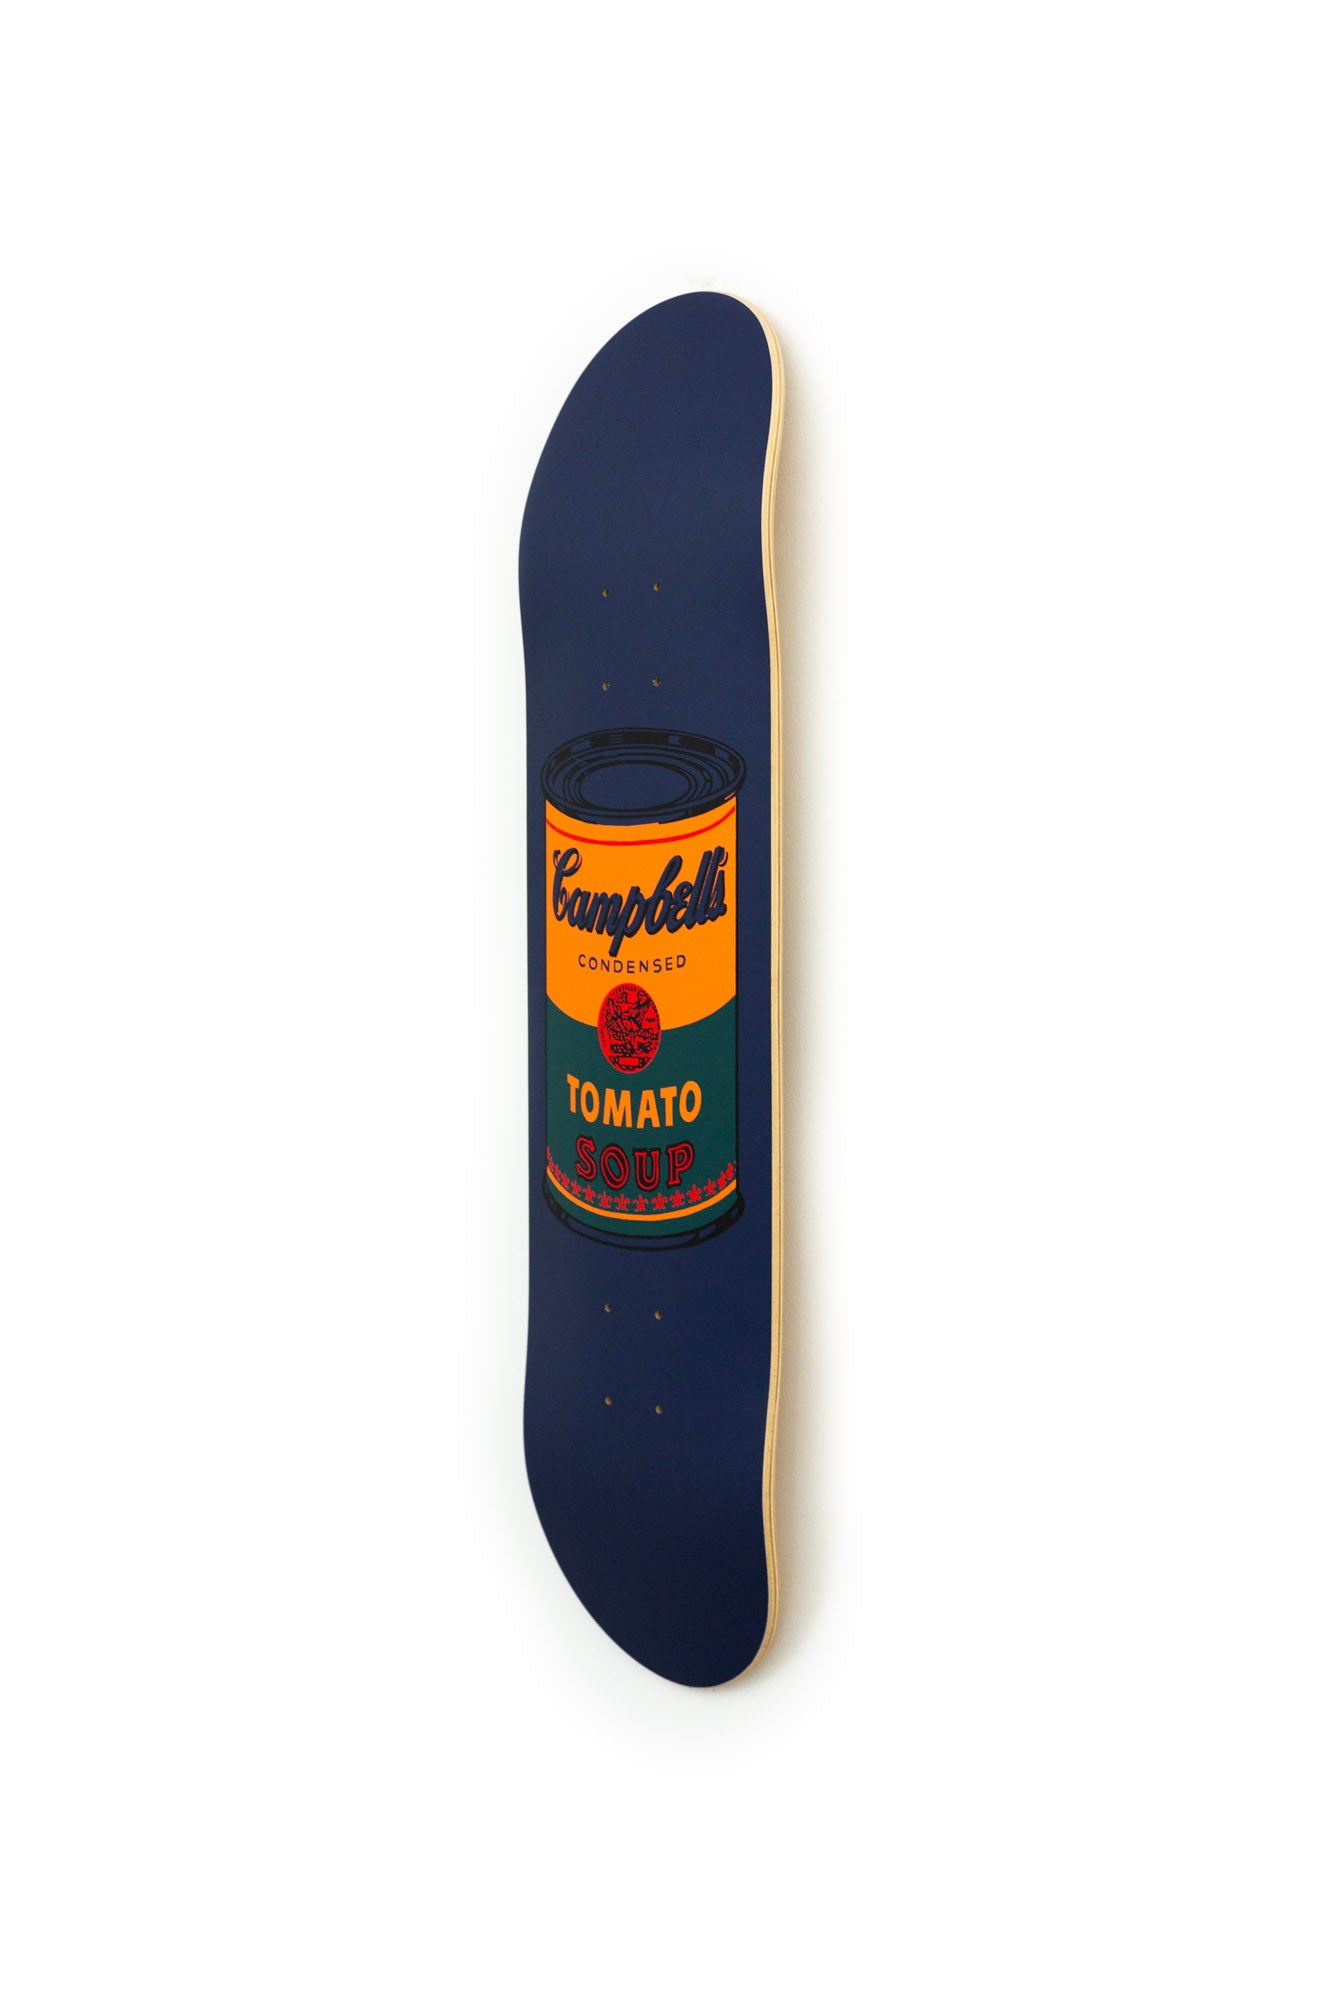 Andy warhol coloured campell's soup red solo deck by THE SKATEROOM bottom edition